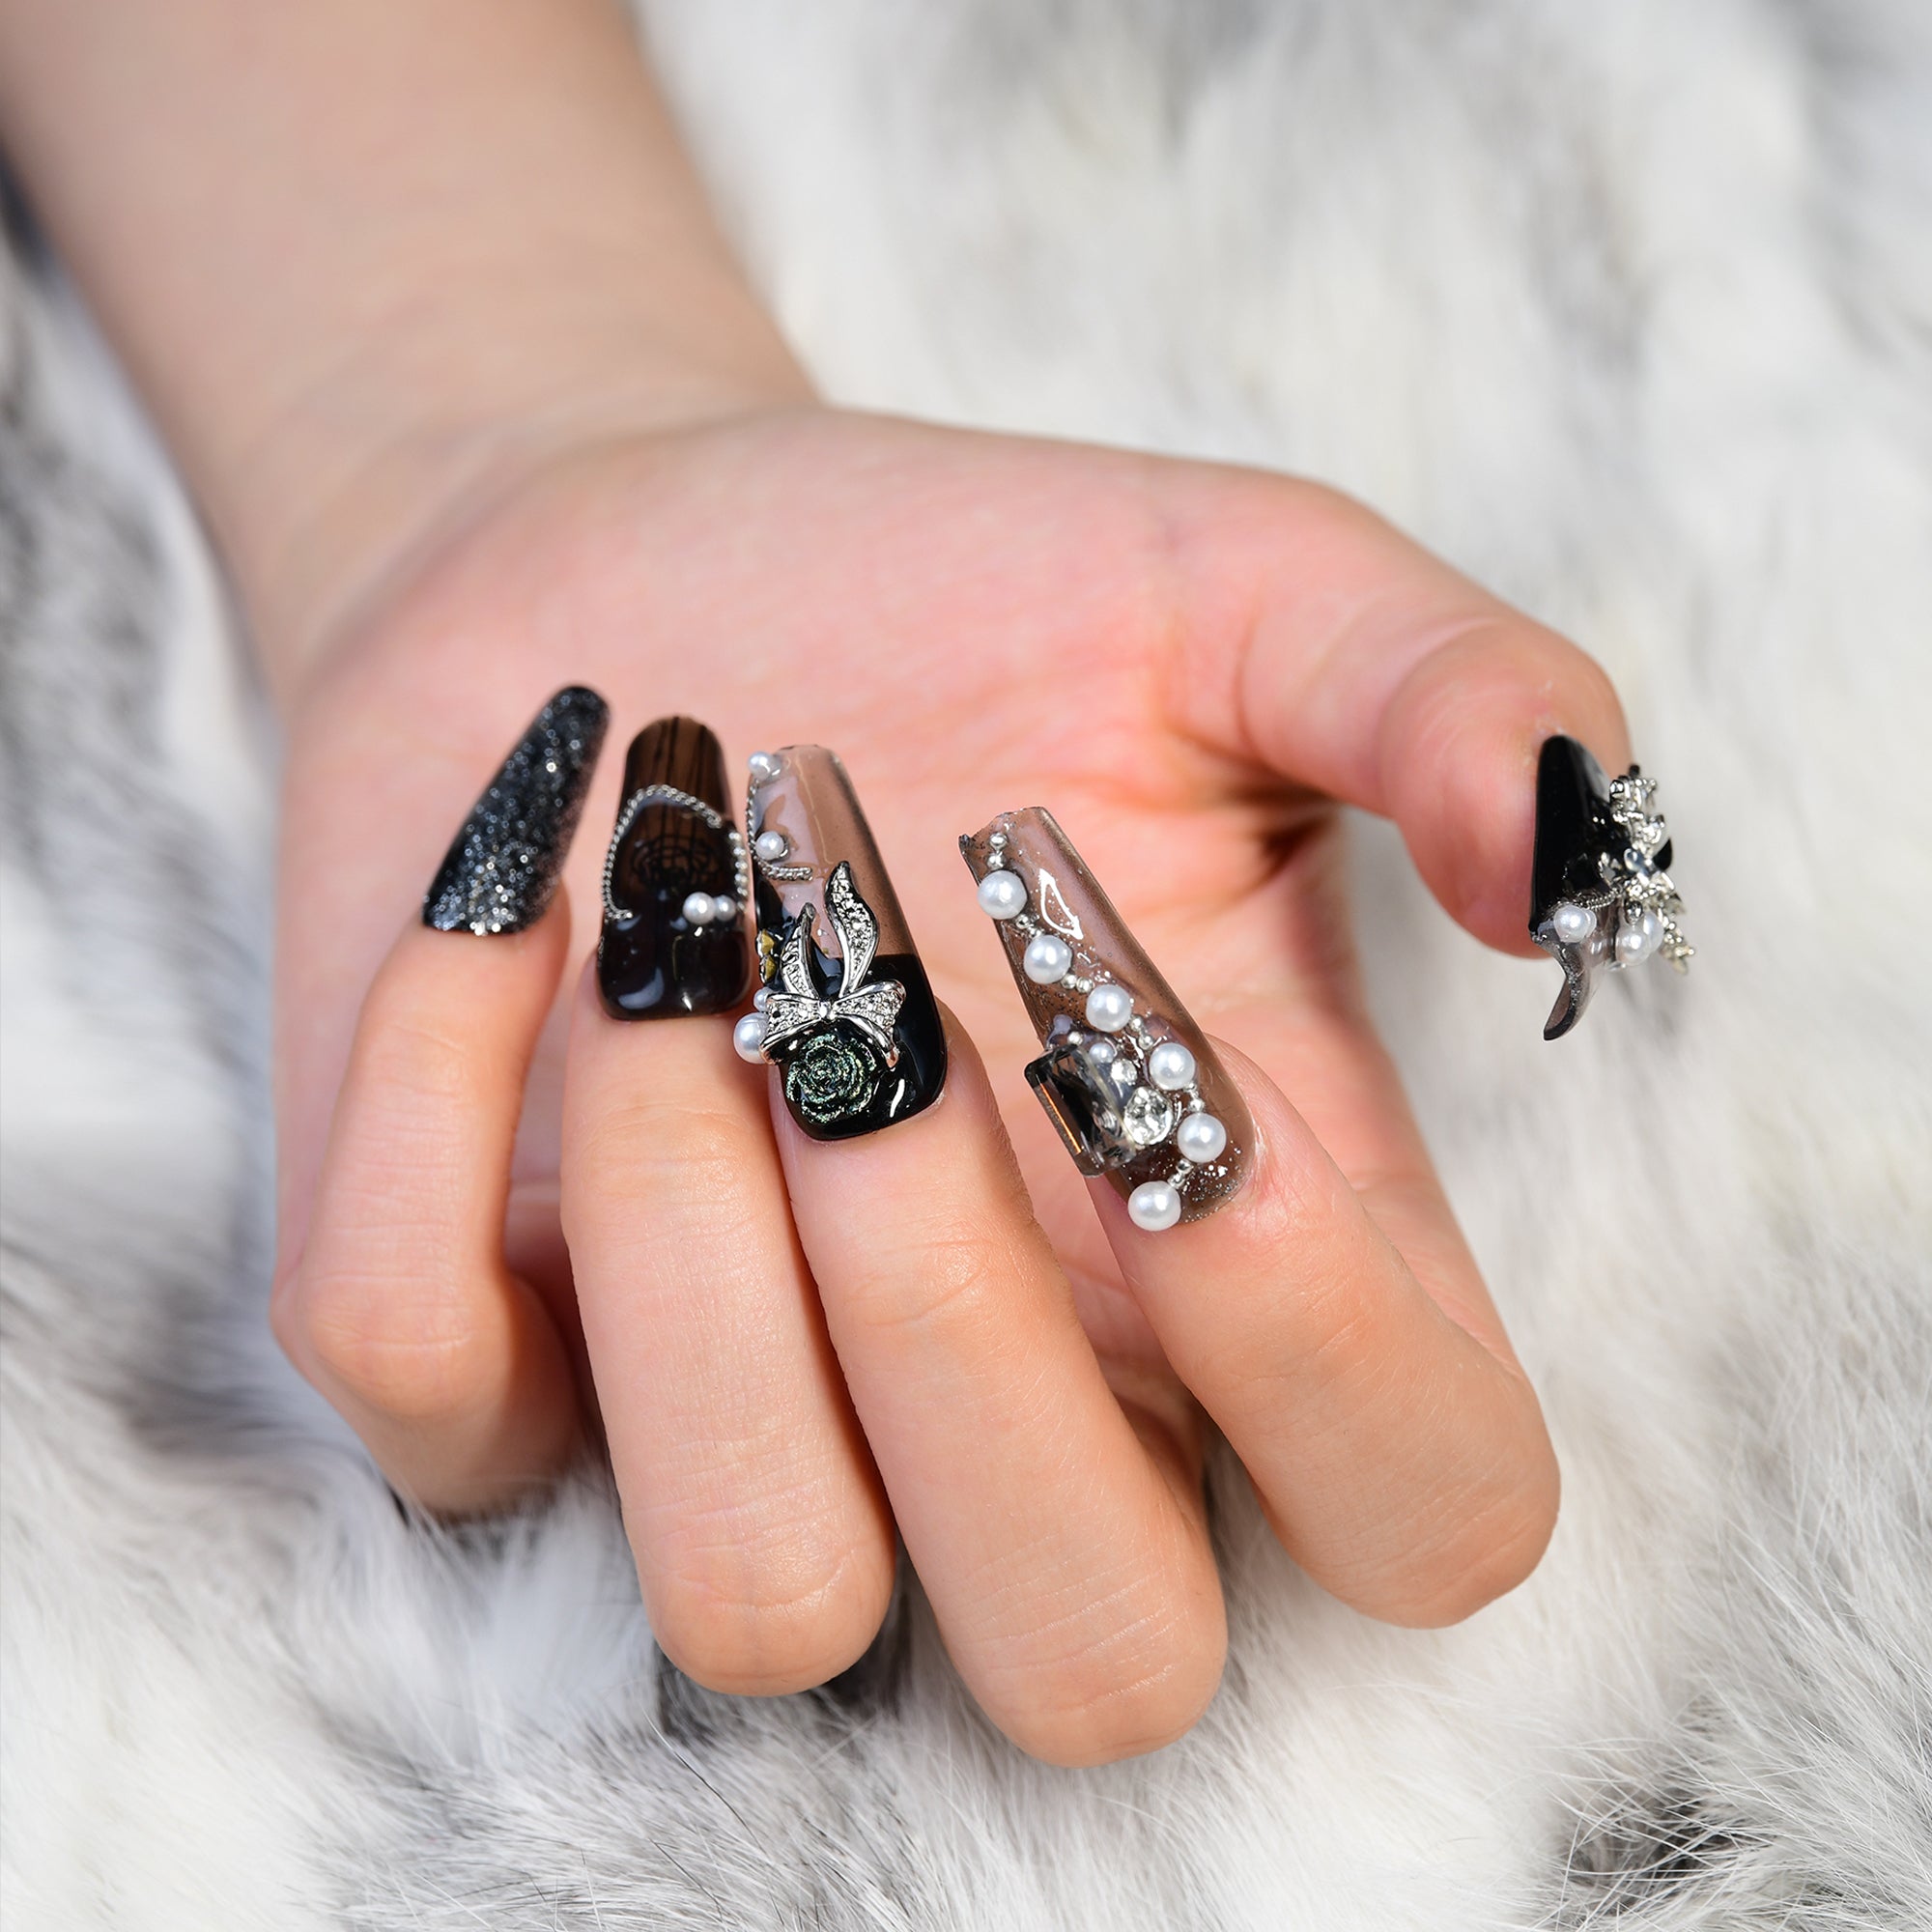 Classy Black Acrylic Extra Long Coffin Handmade Press On Nails With Pearls-BEYONDCANVA